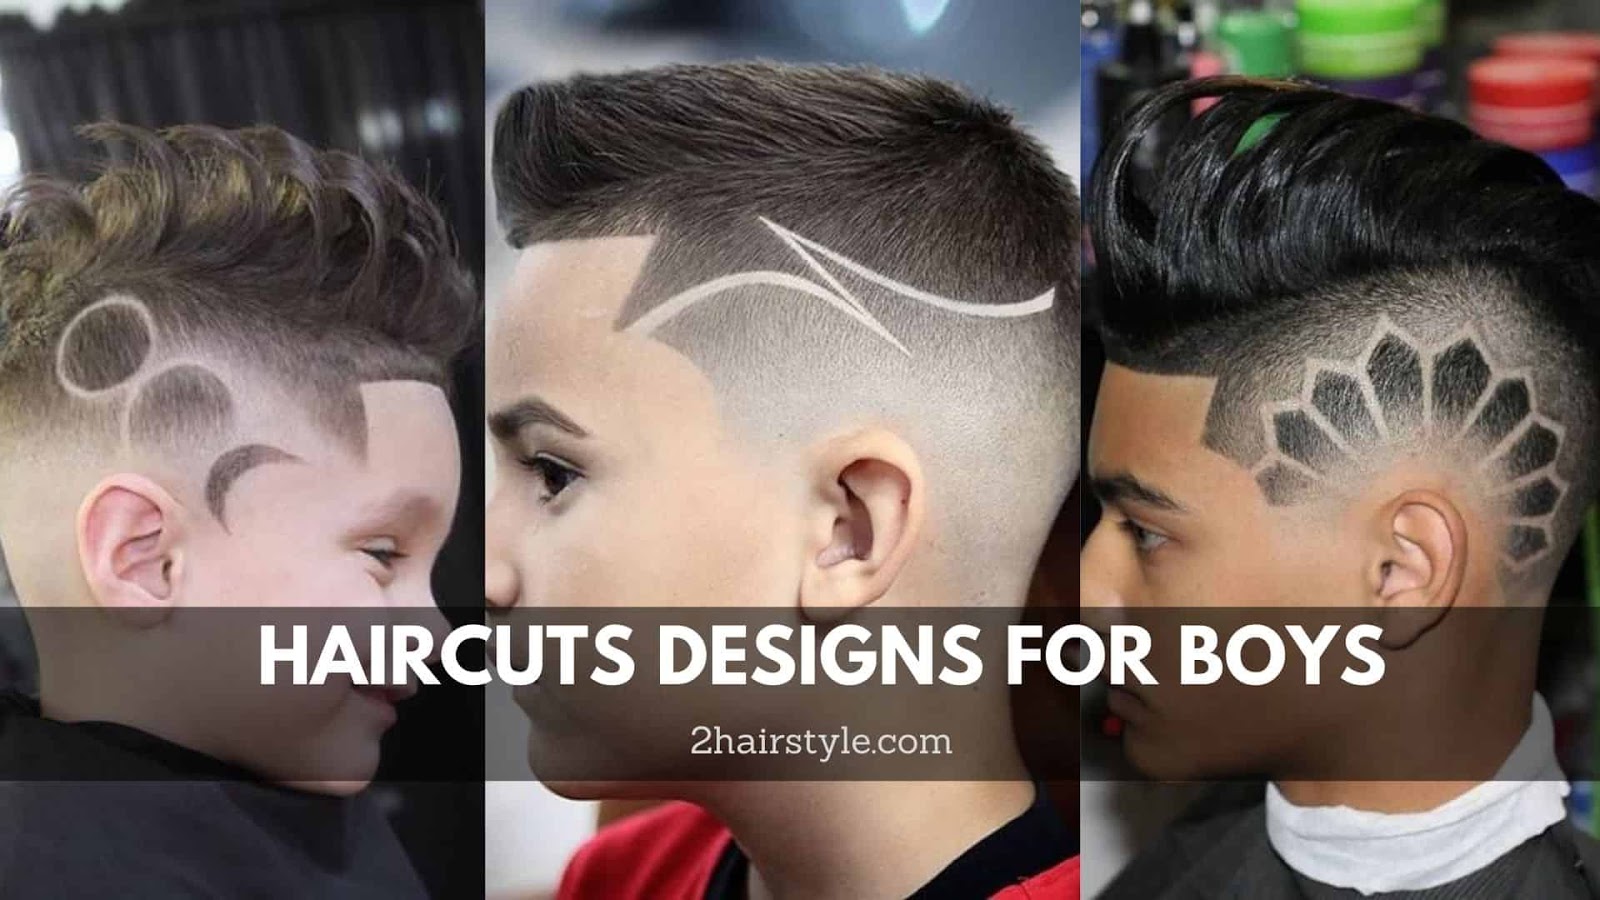 Spiderman Hair Design - Best Hair Cuts For Boys , HD Wallpaper & Backgrounds